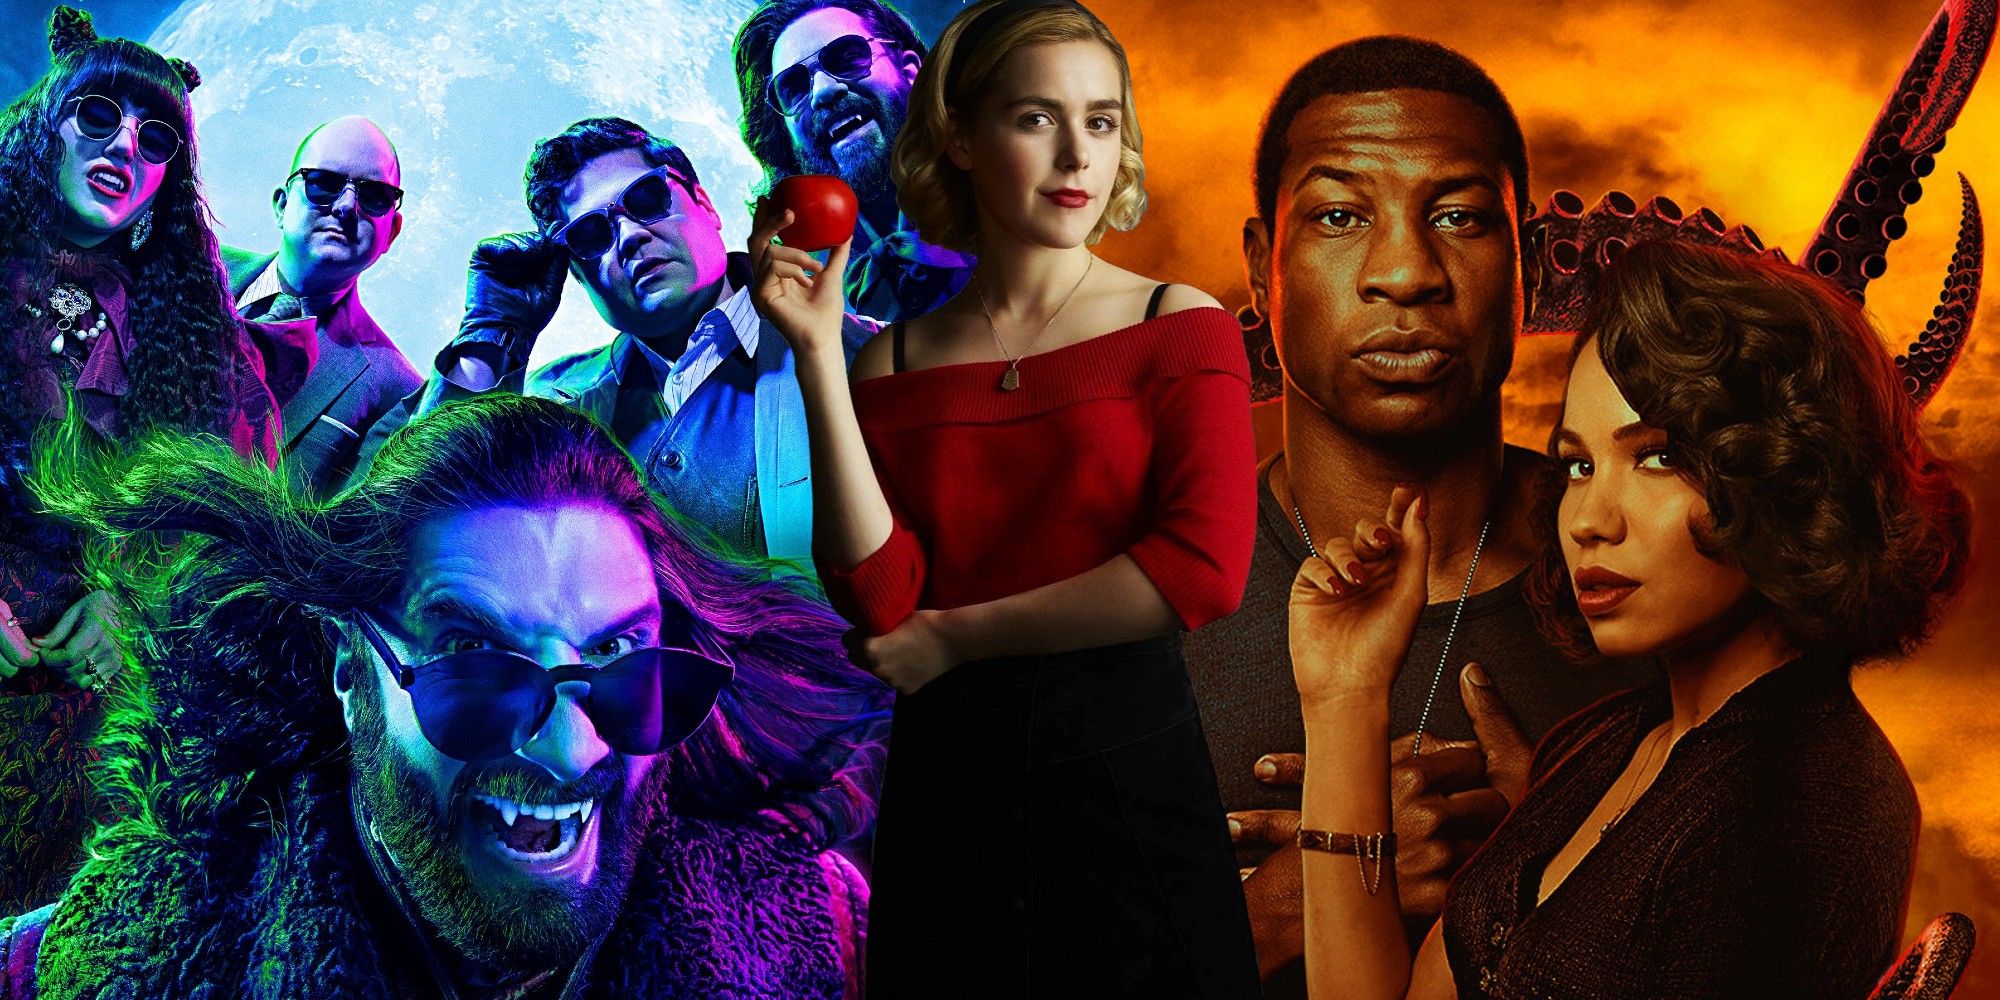 Halloween TV Shows To Binge, including What We Do in the Shadows, The Chilling Adventures of Sabrina, and Lovecraft Country